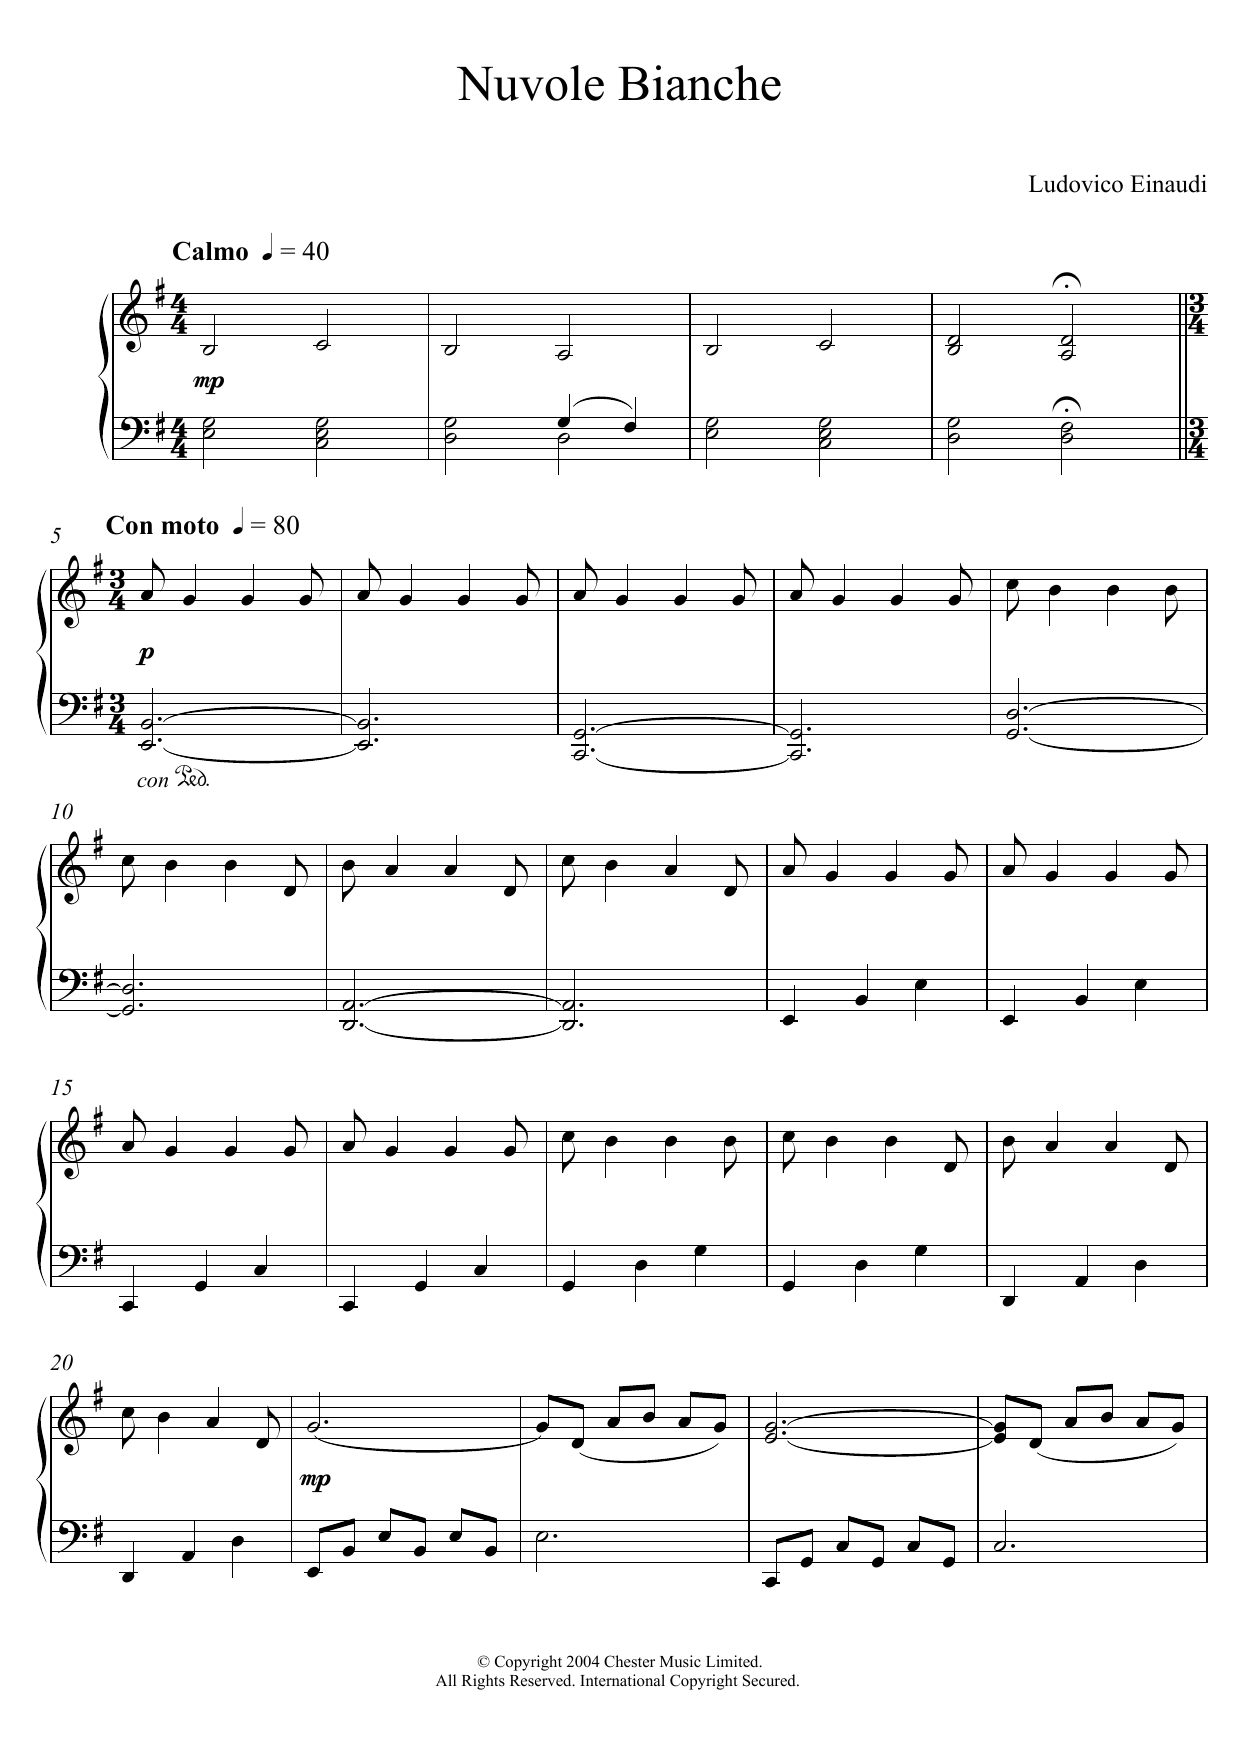 Ludovico Einaudi Nuvole Bianche sheet music notes and chords. Download Printable PDF.